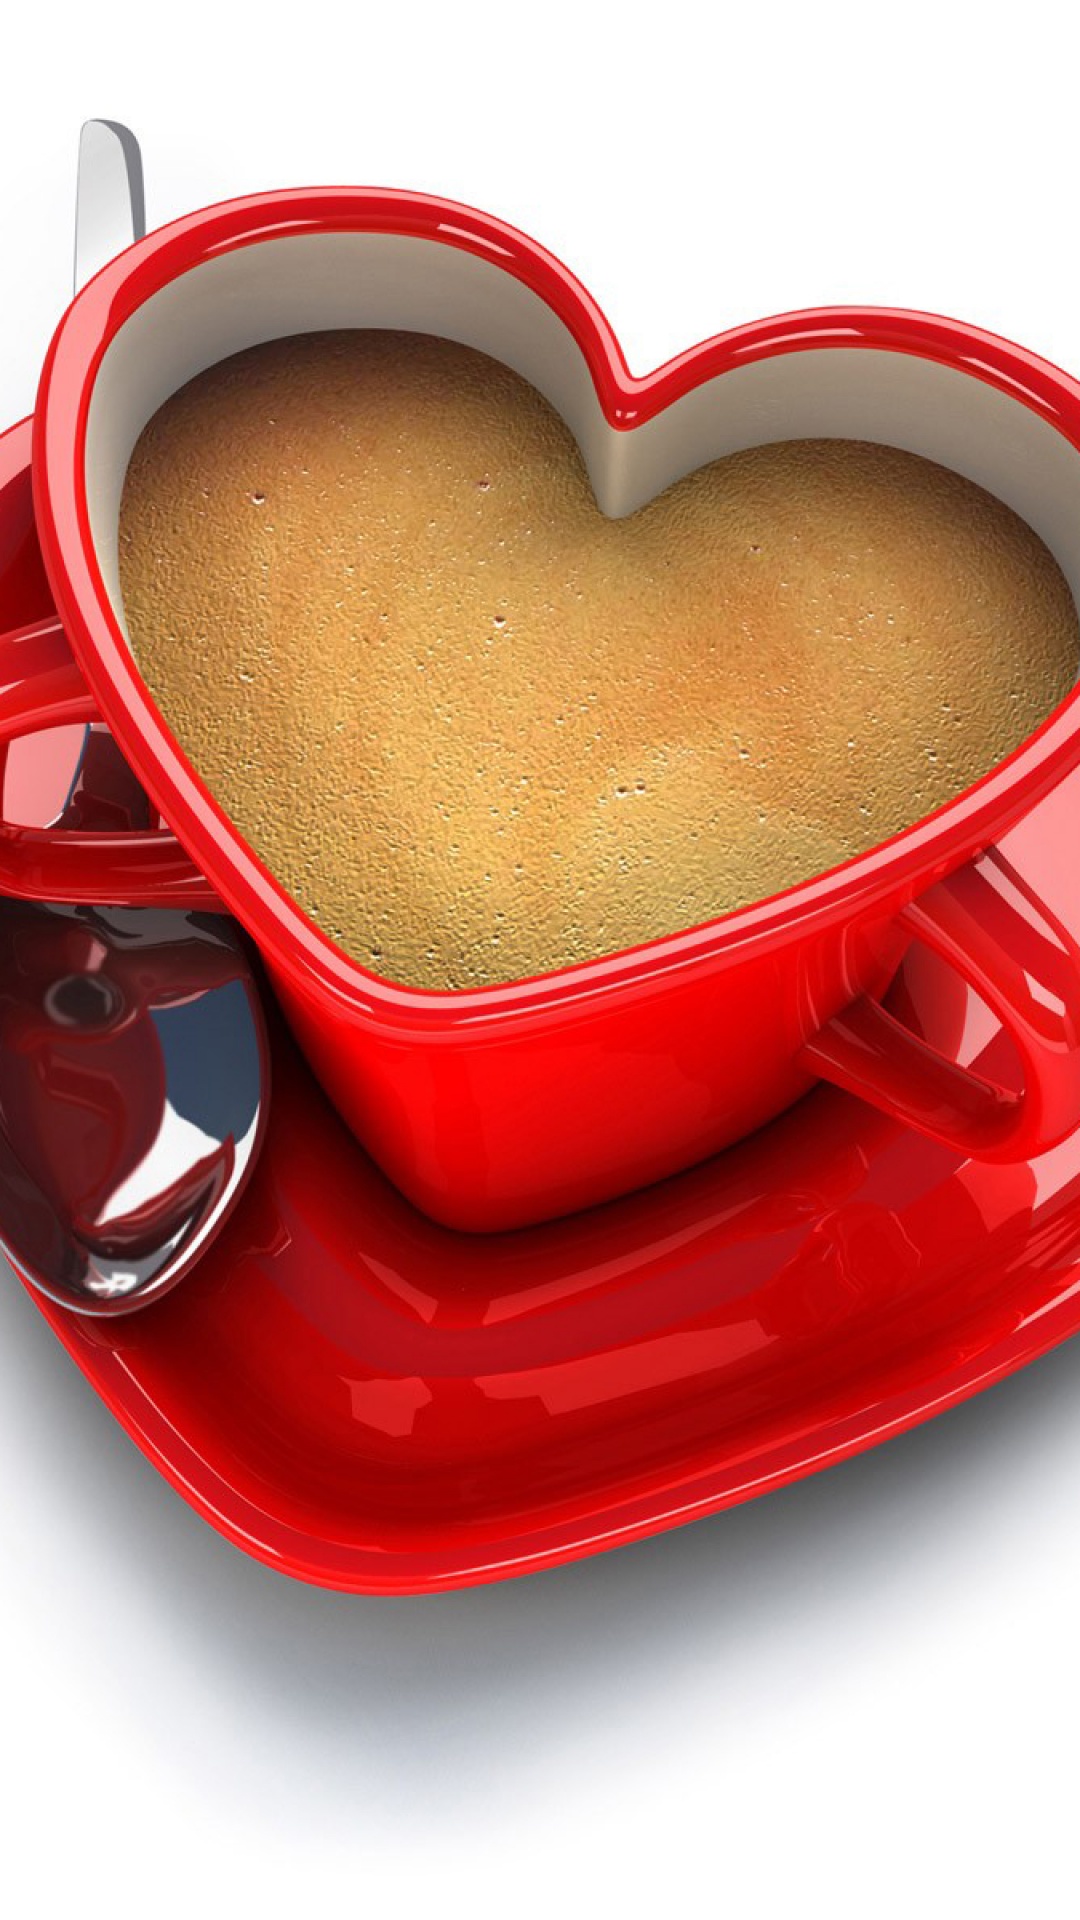 Heart Coffee Cup Iphone Wallpapers